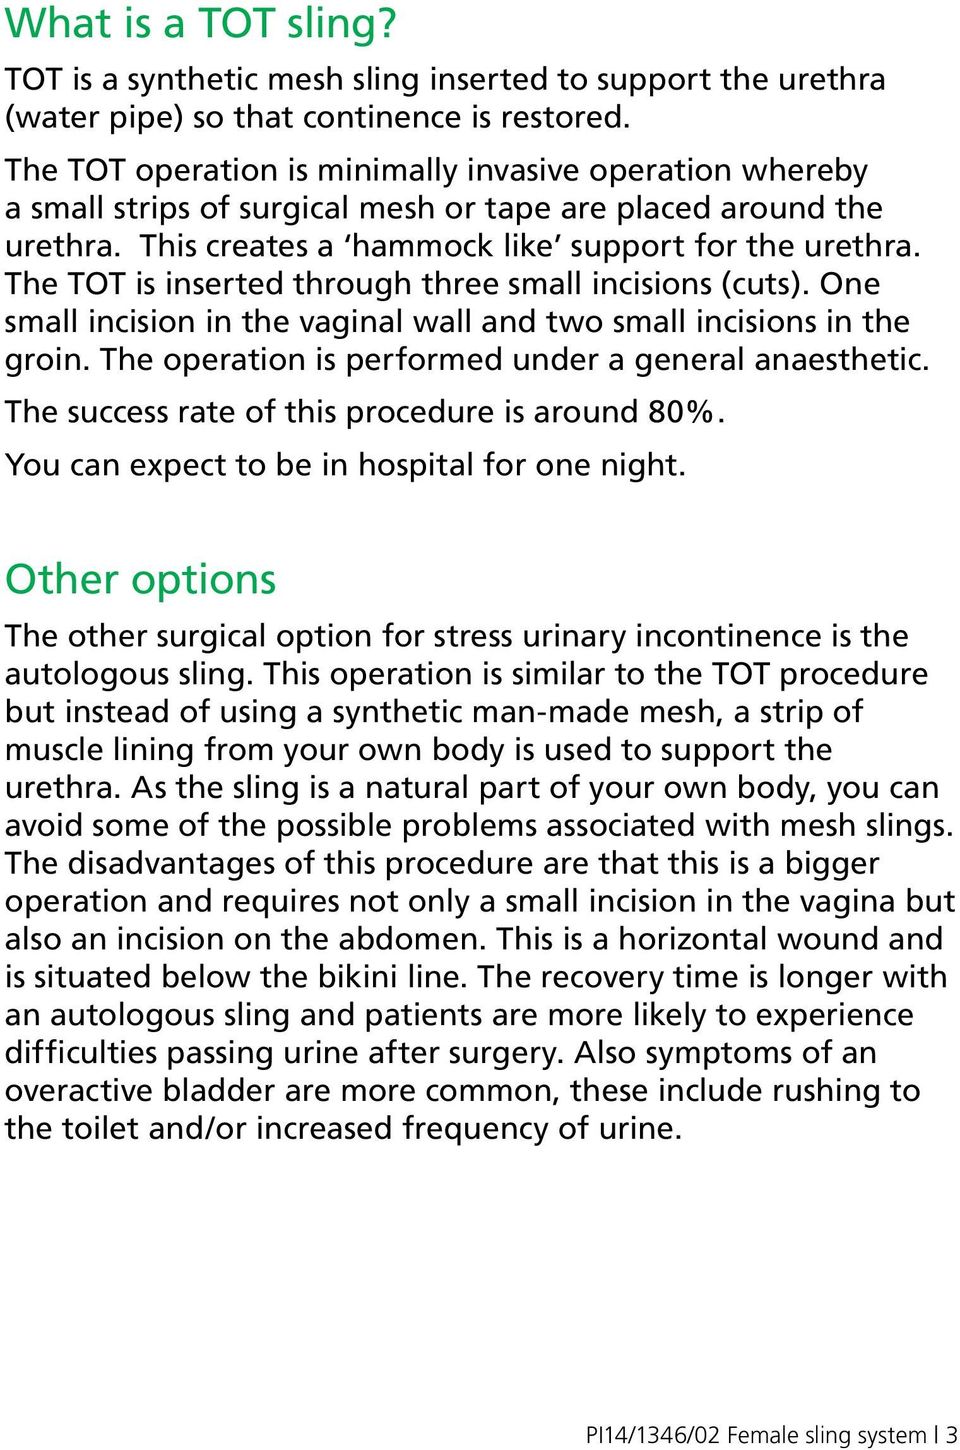 The TOT is inserted through three small incisions (cuts). One small incision in the vaginal wall and two small incisions in the groin. The operation is performed under a general anaesthetic.